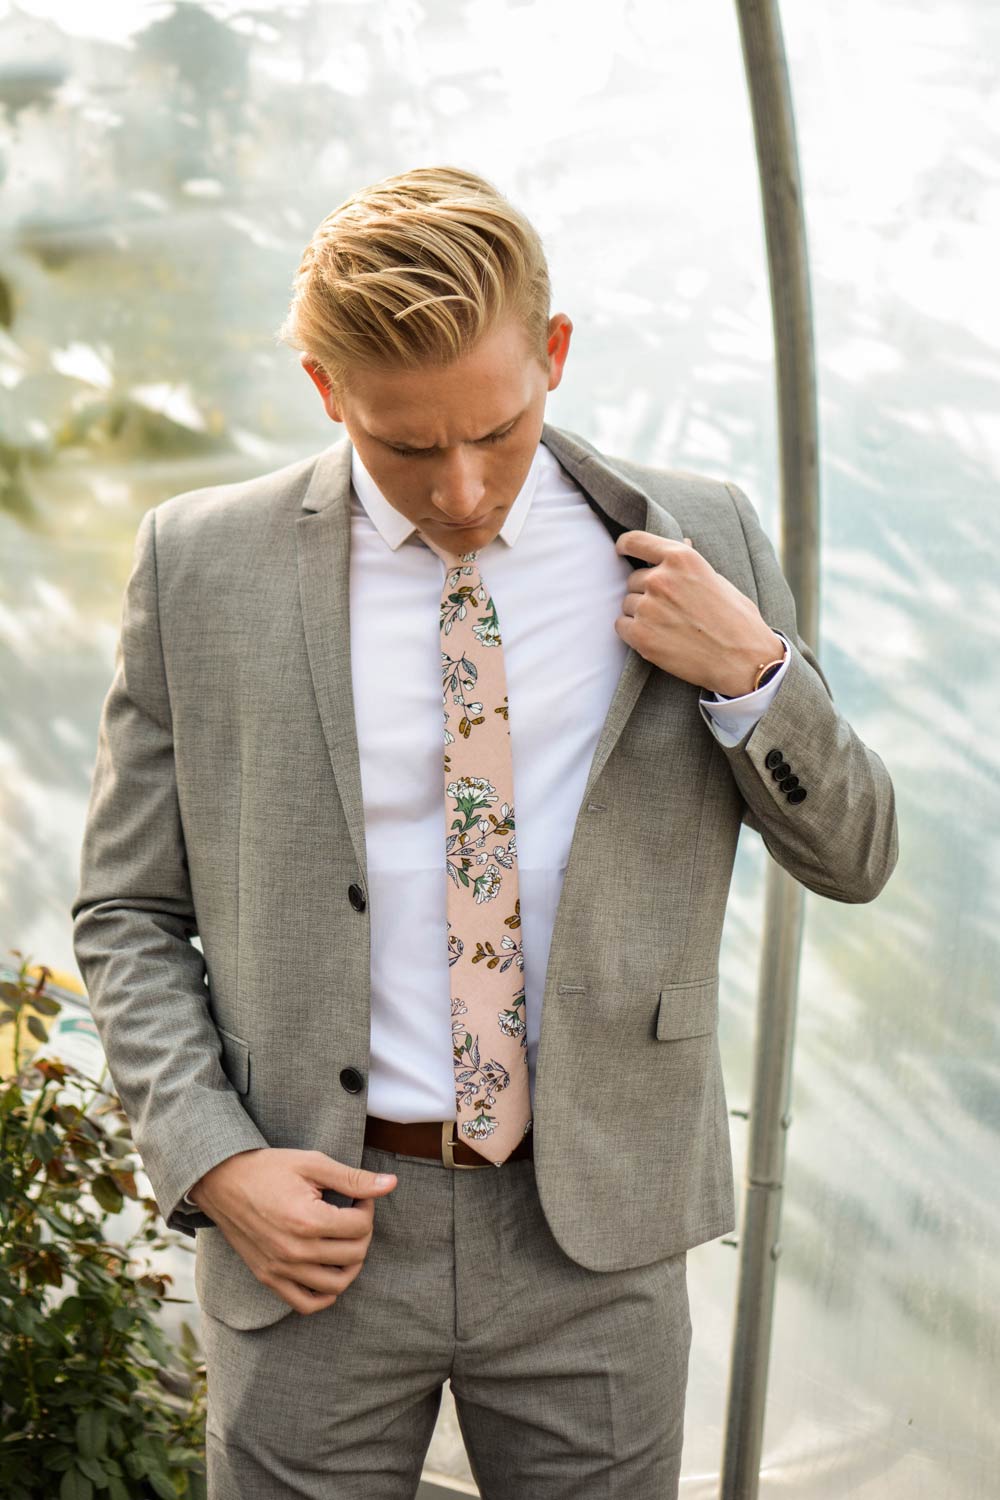 Dusty Lily tie worn with white shirt and gray suit.